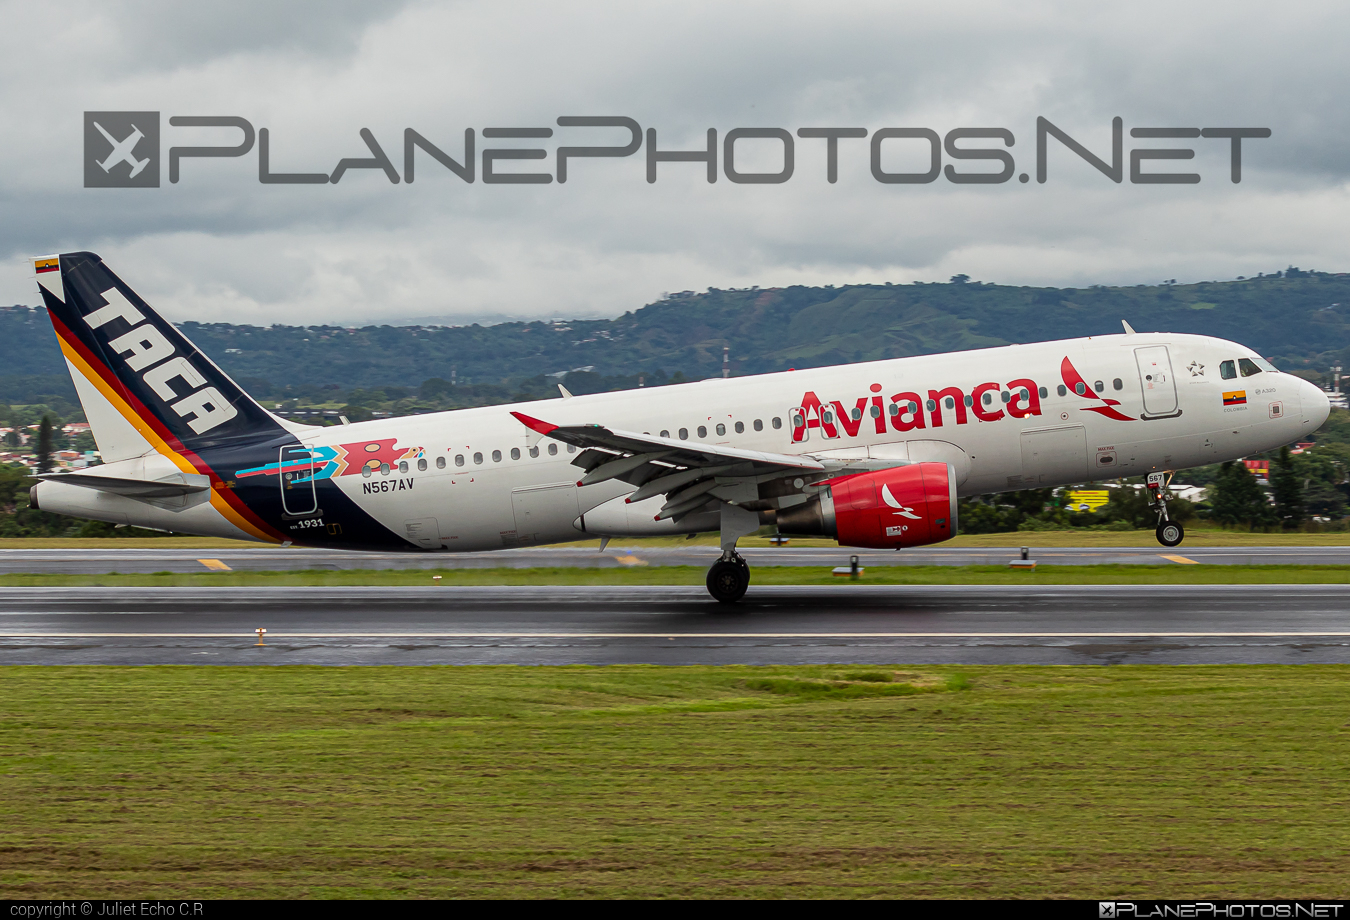 Airbus A320-214 - N567AV operated by Avianca #a320 #a320family #airbus #airbus320 #avianca